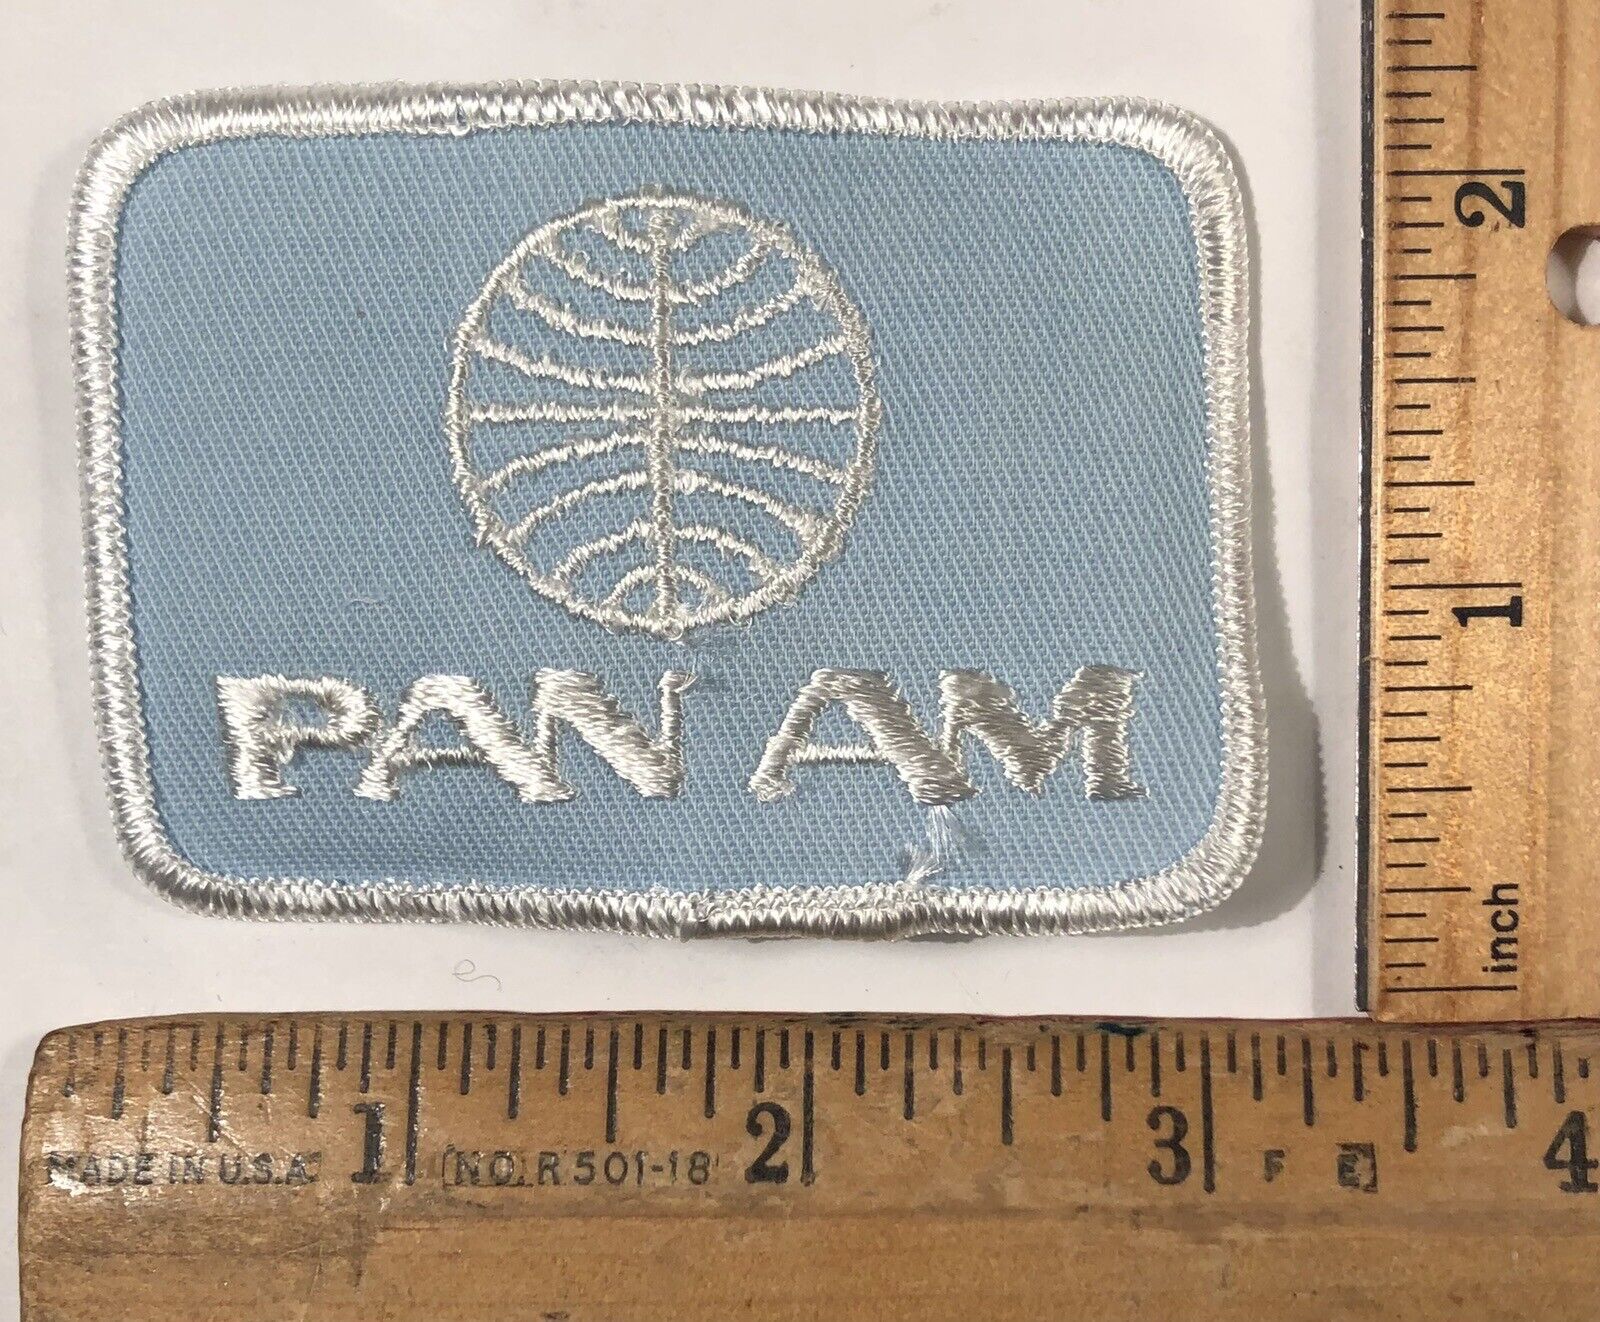 Vintage Pan Am Airlines Logo 2” x 3” Patch Airplane Aviation